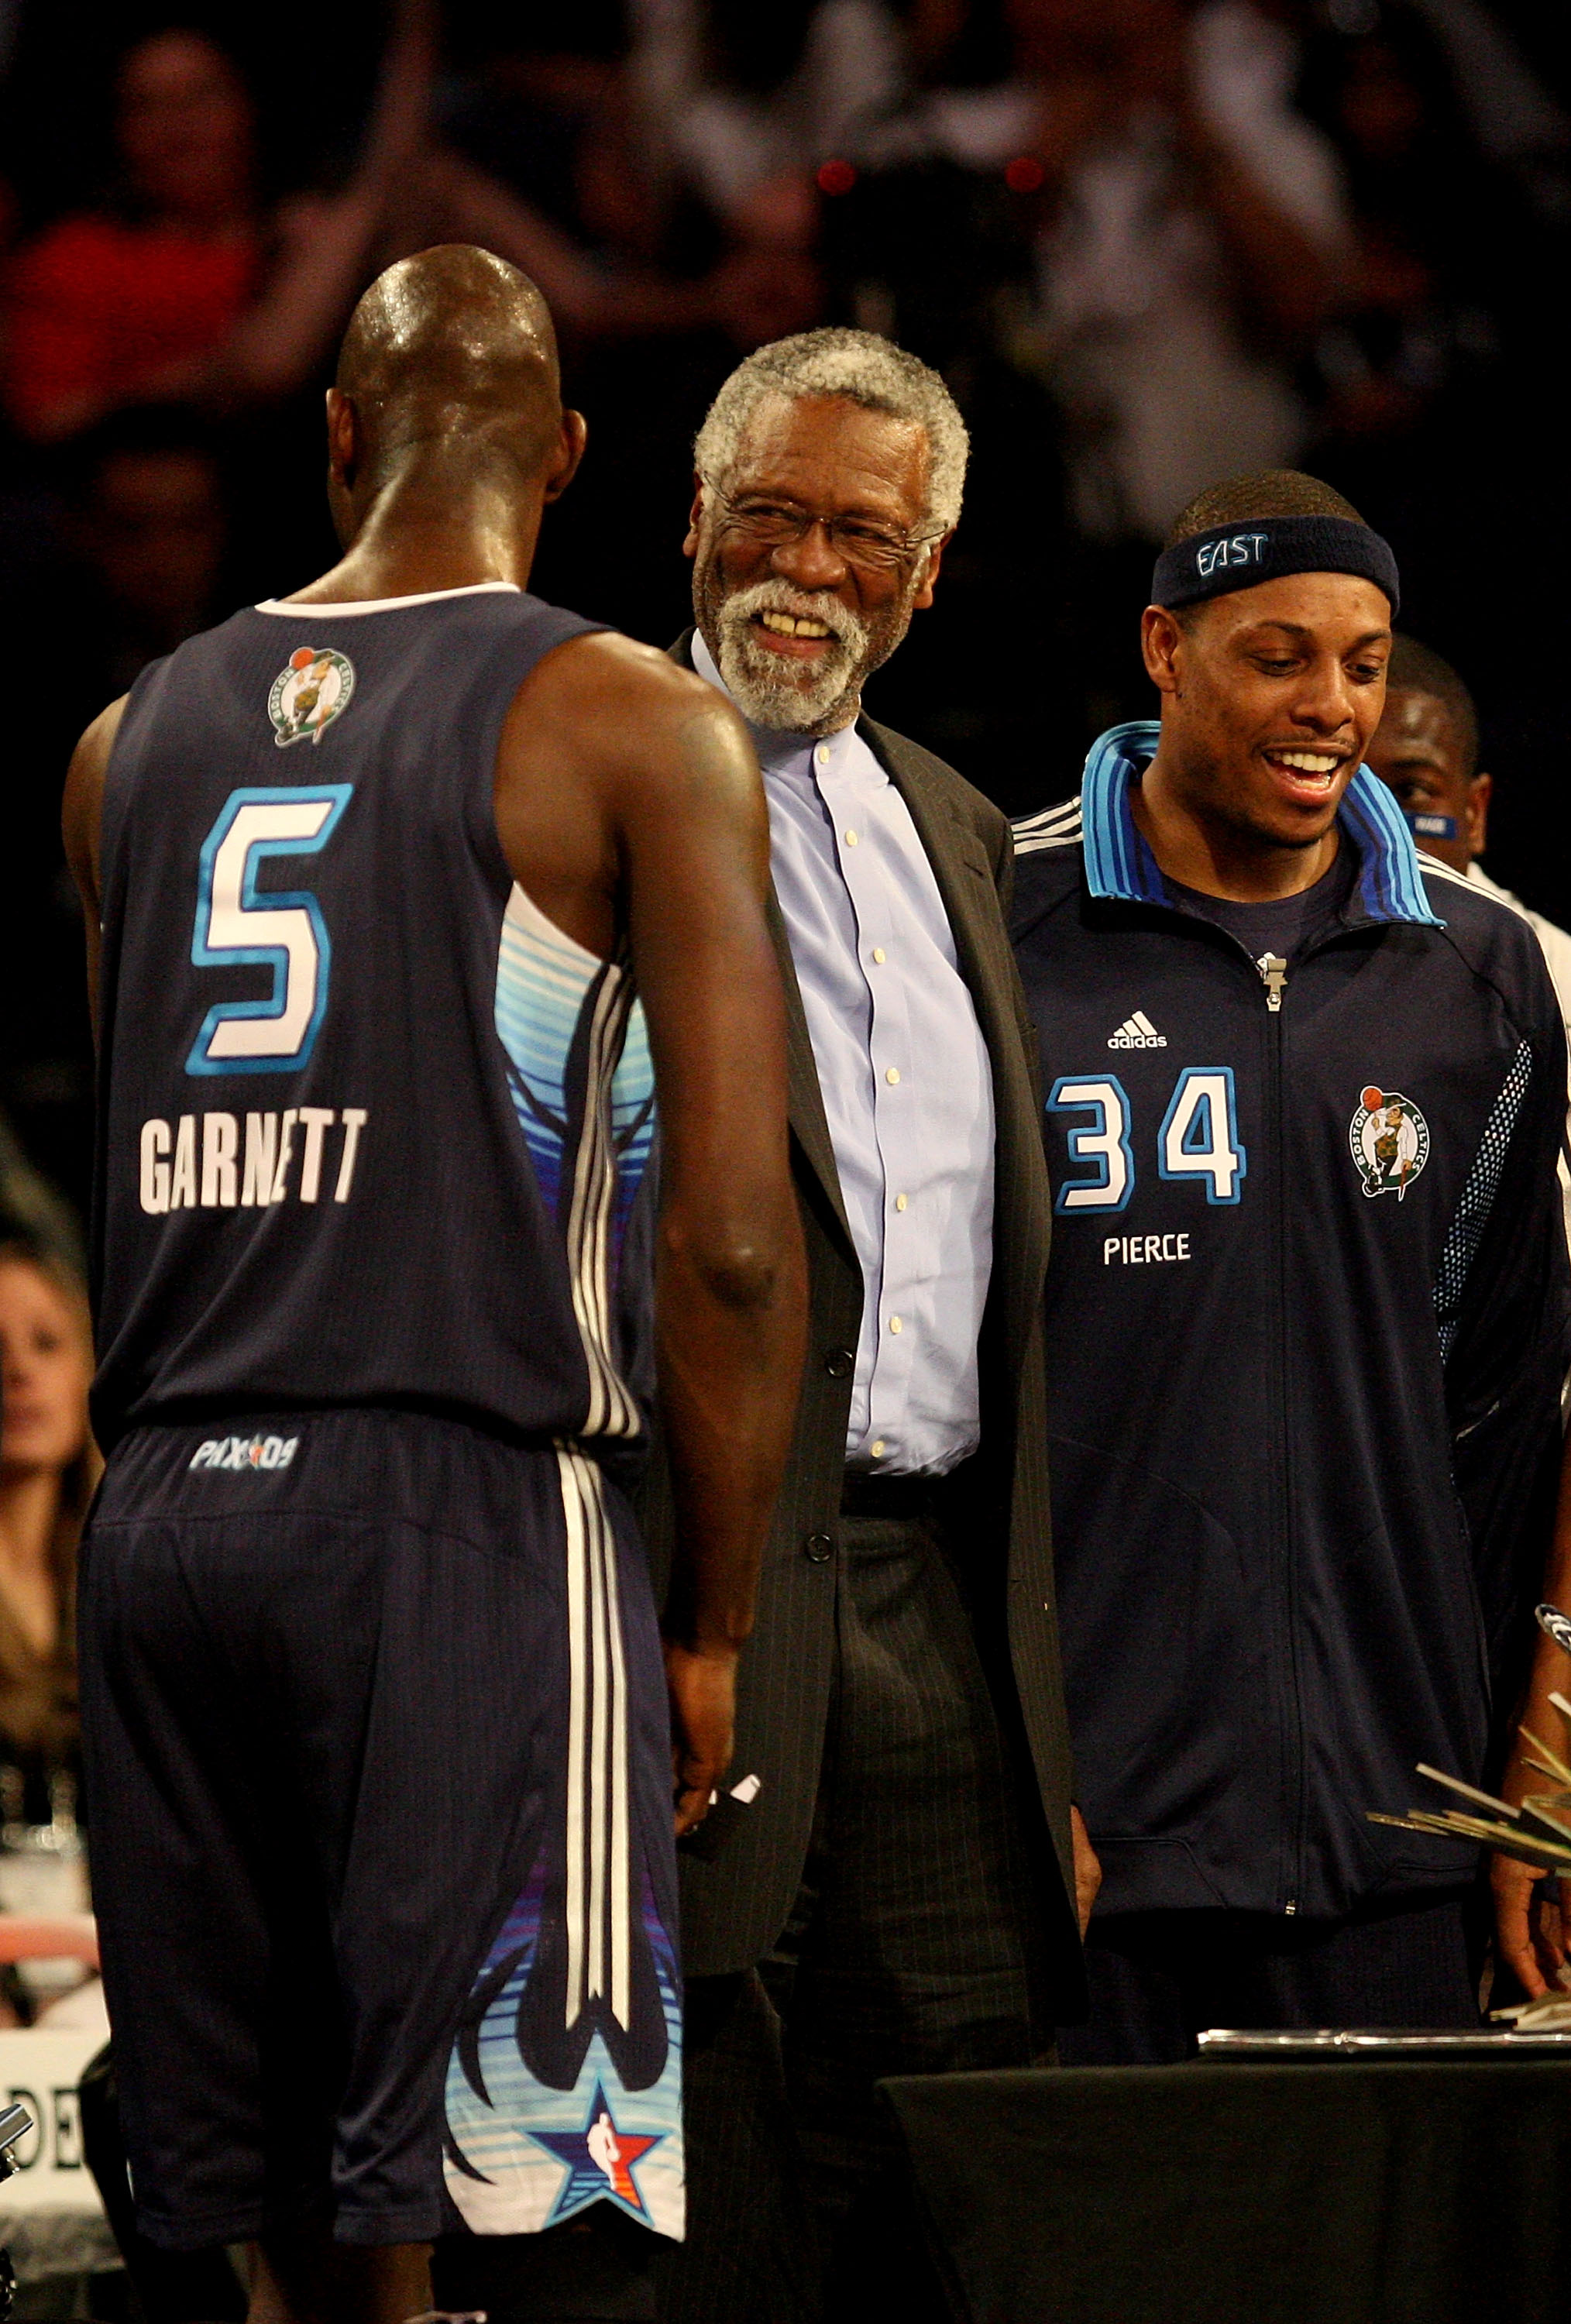 PHOENIX - FEBRUARY 15:  Kevin Garnett #5 and Paul Pierce #34 of the Eastern Conference present a birthday cake to NBA legend Bill Russell, center, during the 58th NBA All-Star Game, part of 2009 NBA All-Star Weekend at US Airways Center on February 15, 20